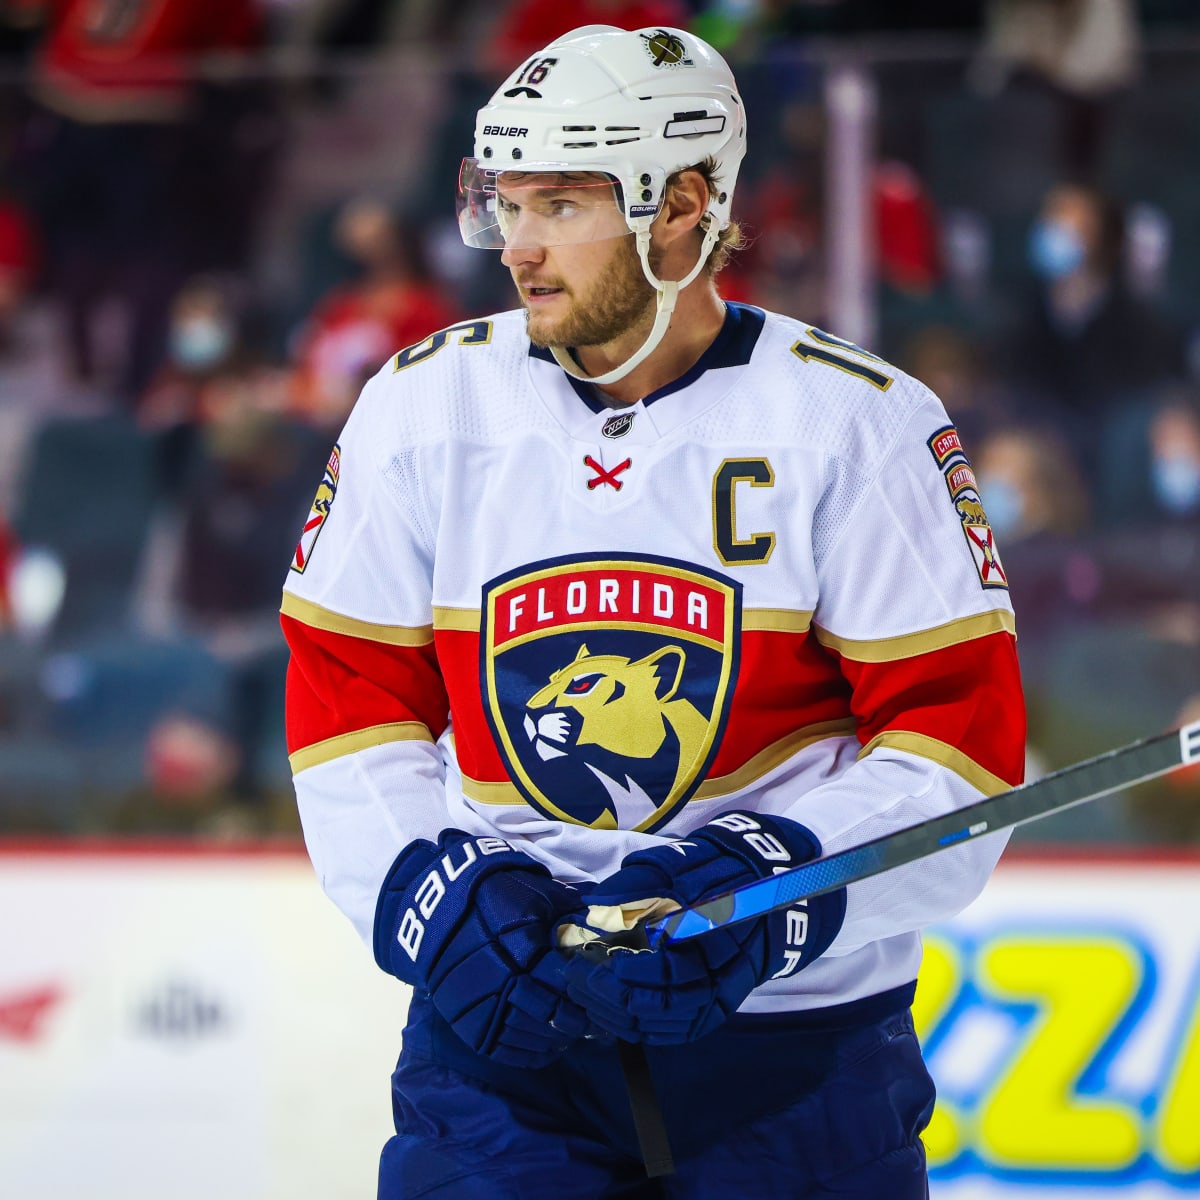 Safety first, but Sasha Barkov says the Panthers deserve to play if NHL  returns - The Athletic